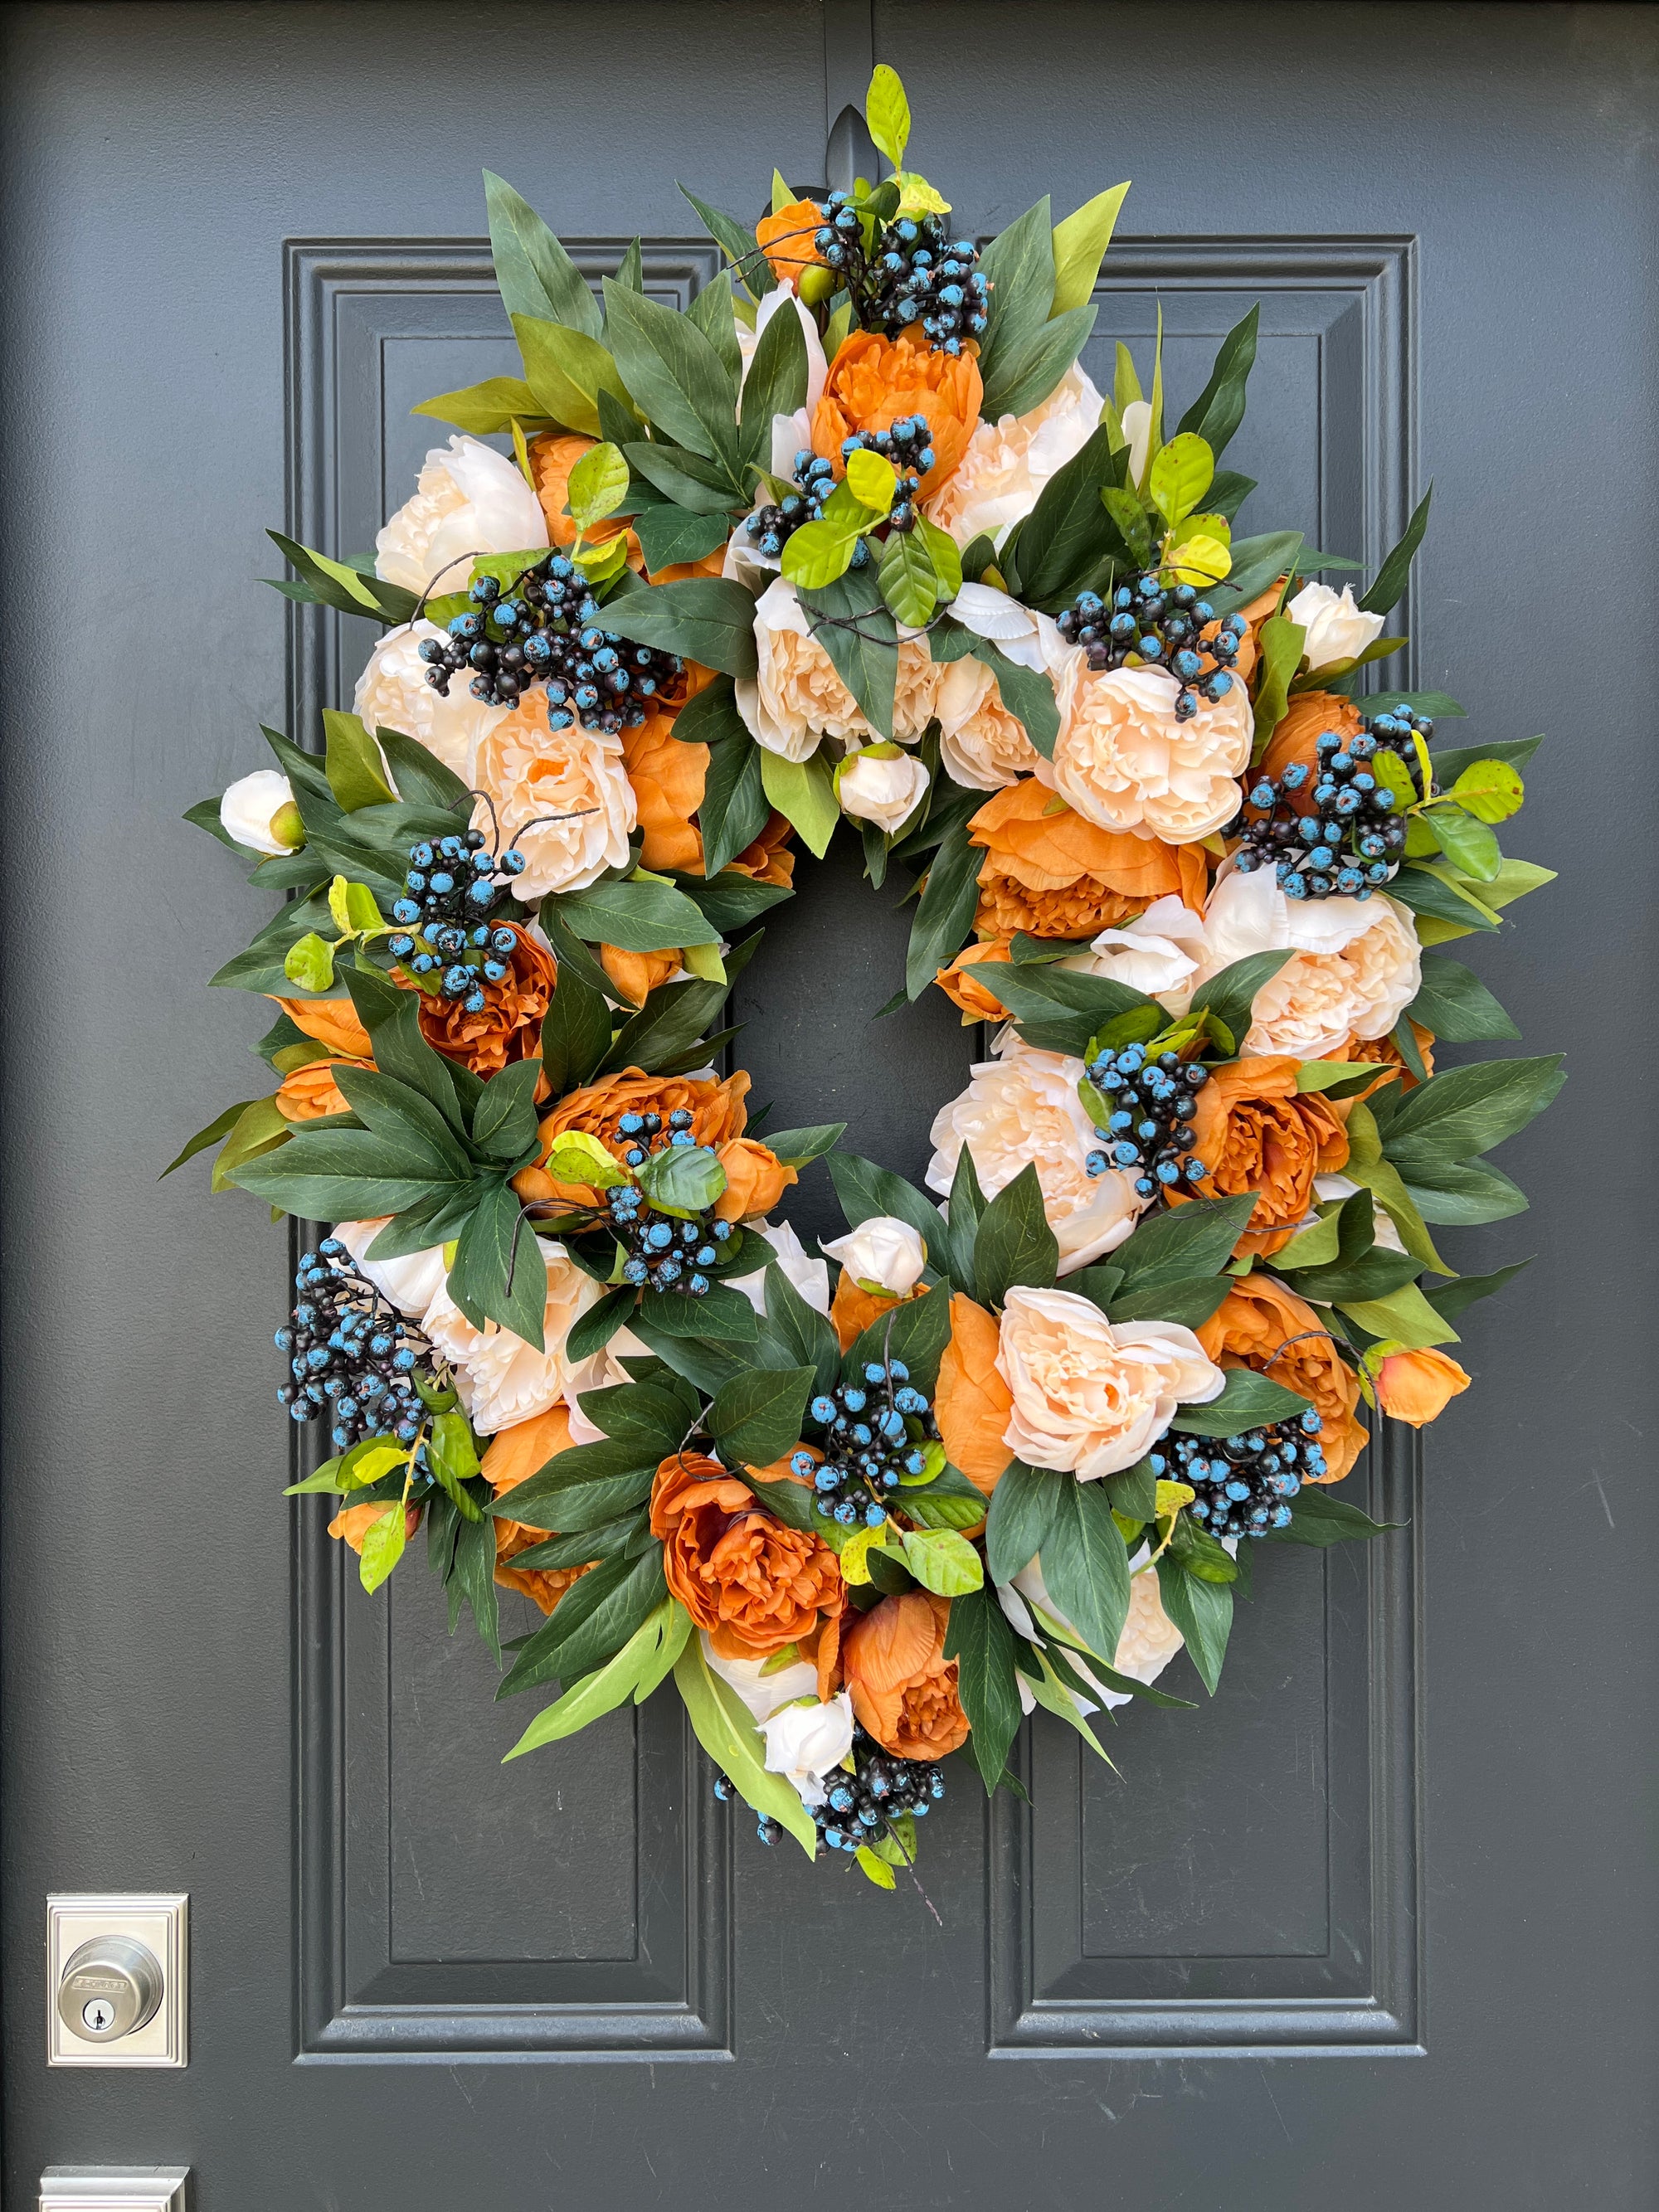 NEW Autumn Harvest Oval Wreath with Blueberries, Ready to Ship